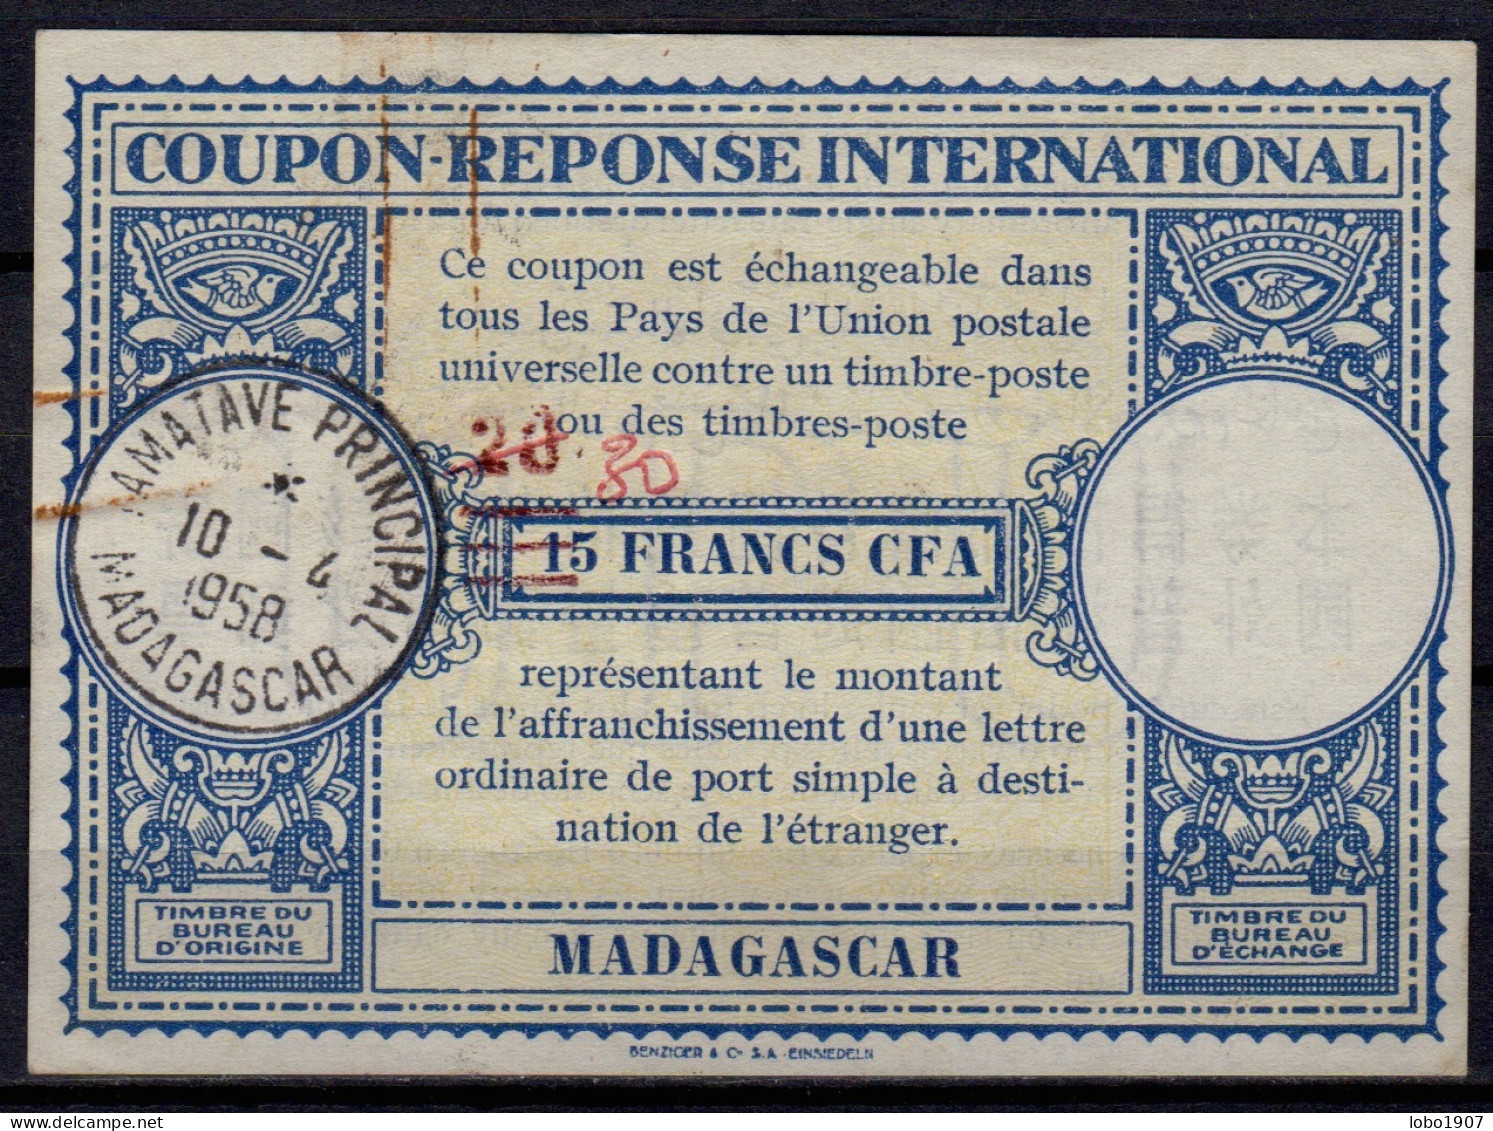 MADAGASCAR  Lo15  30 / Handstamp 20 / 15 FRANCS CFA Int. Reply Coupon Reponse Antwortschein IRC IAS  TAMATAVE 10.04.58 - Lettres & Documents